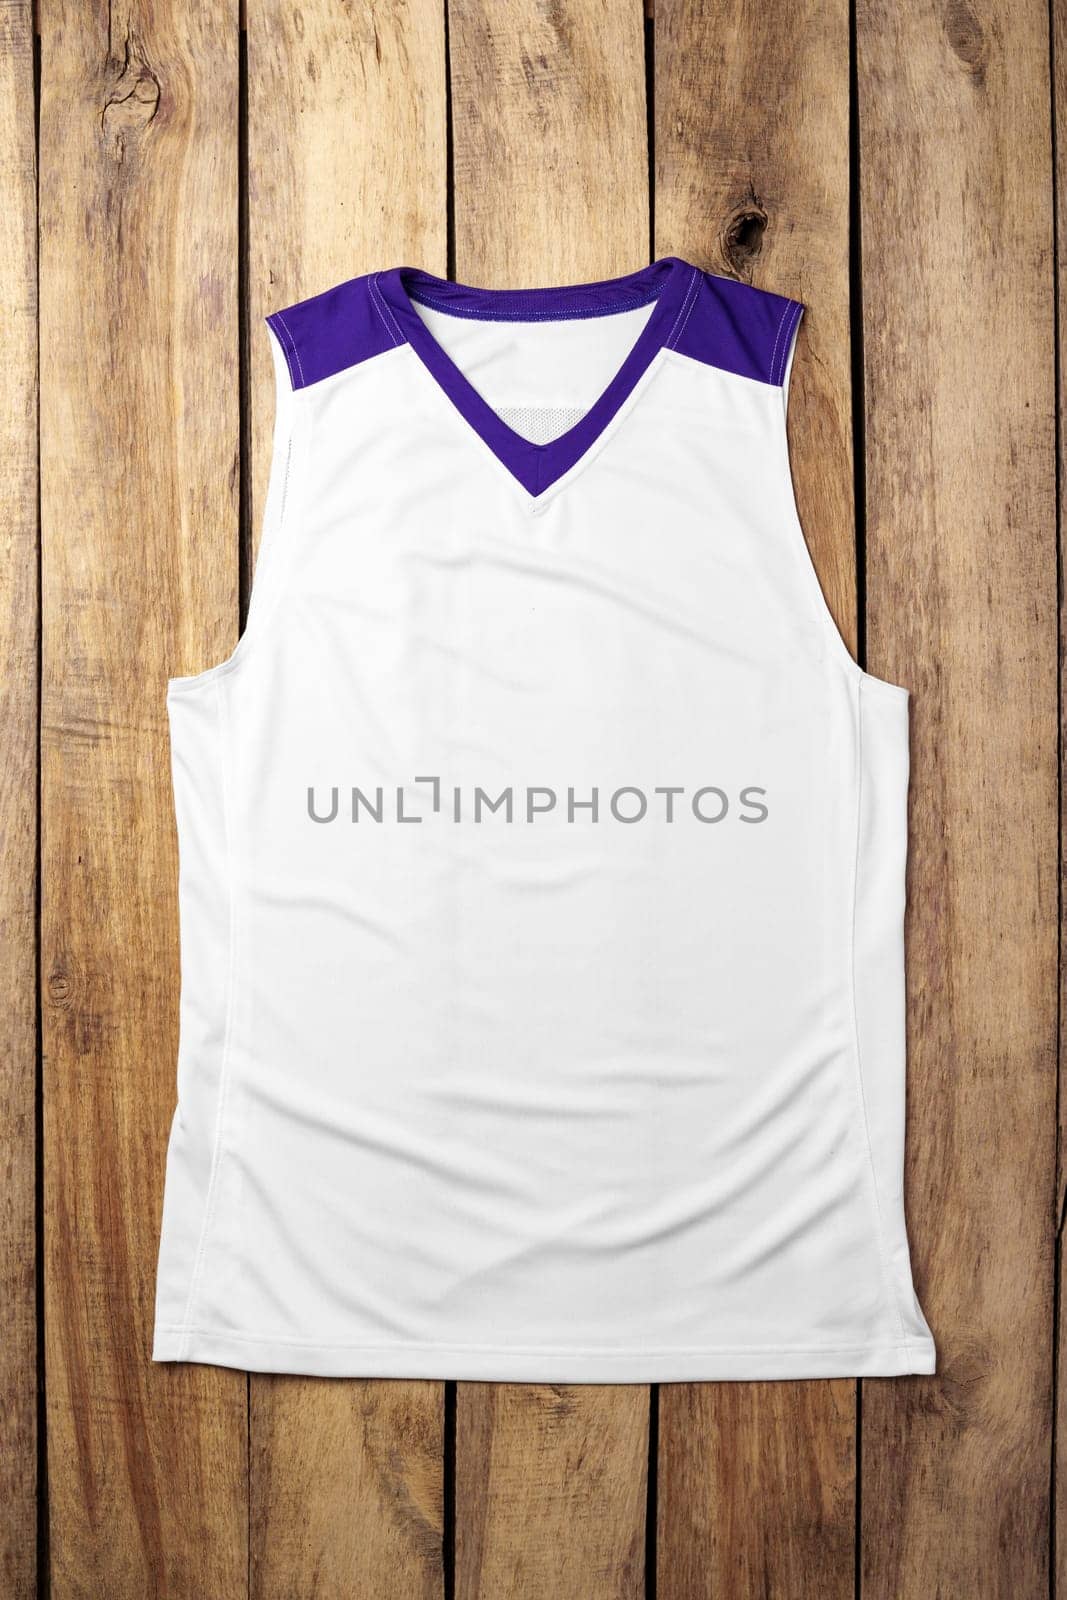 Basketball uniform on wooden background top view by Fabrikasimf